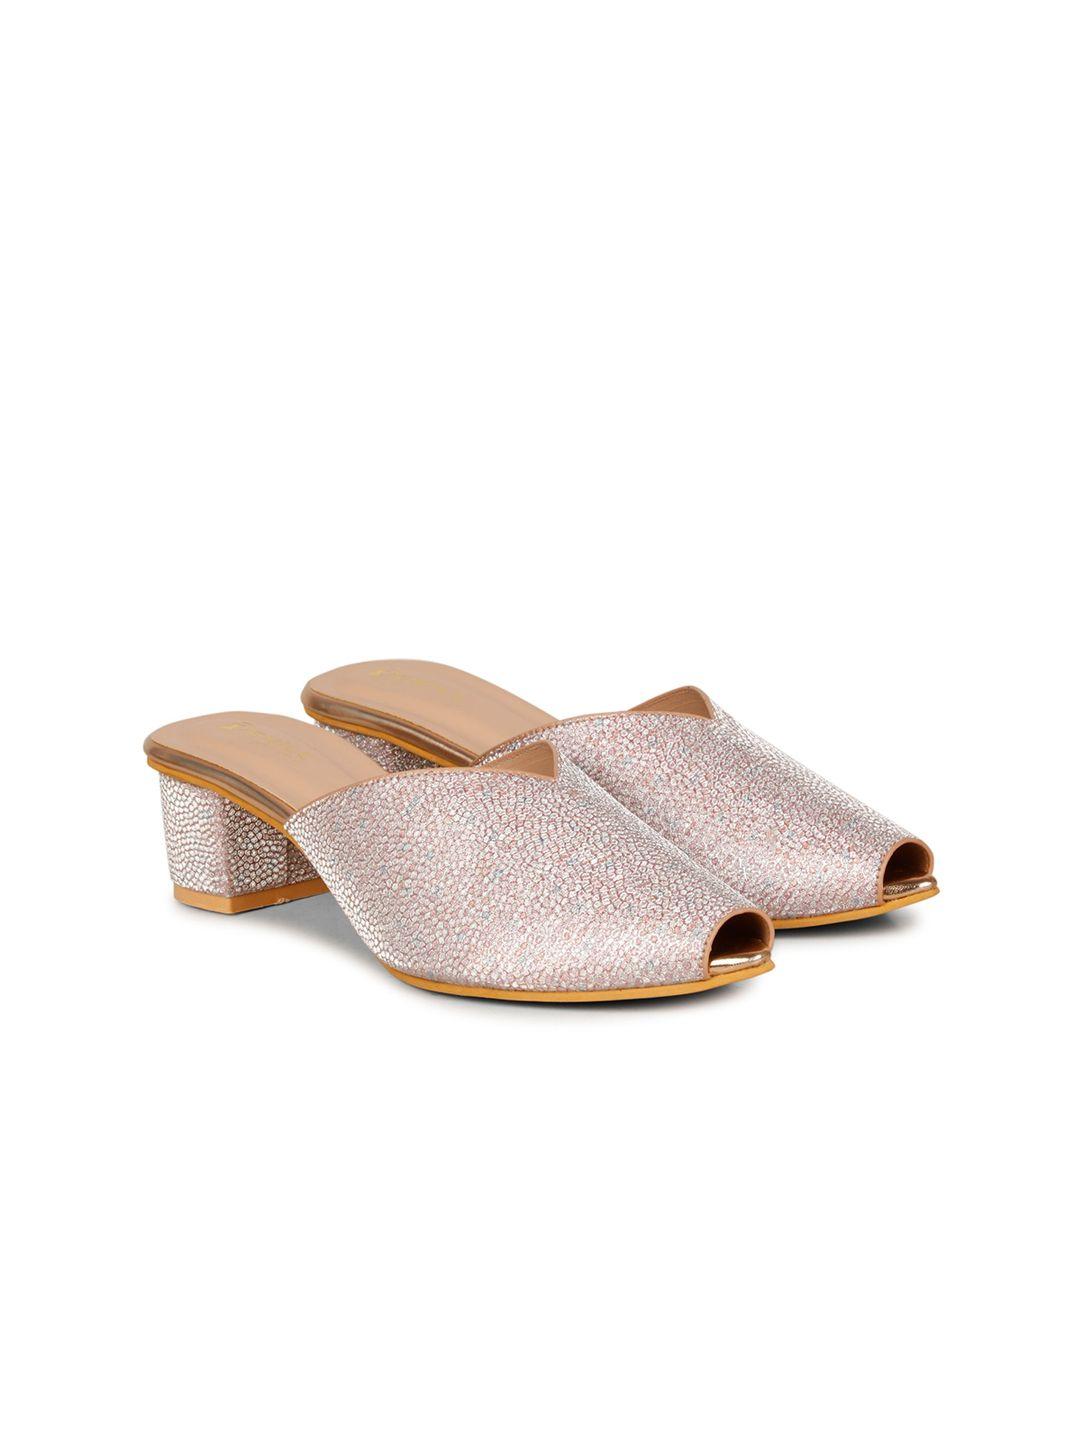 denill pointed toe embellished block mules